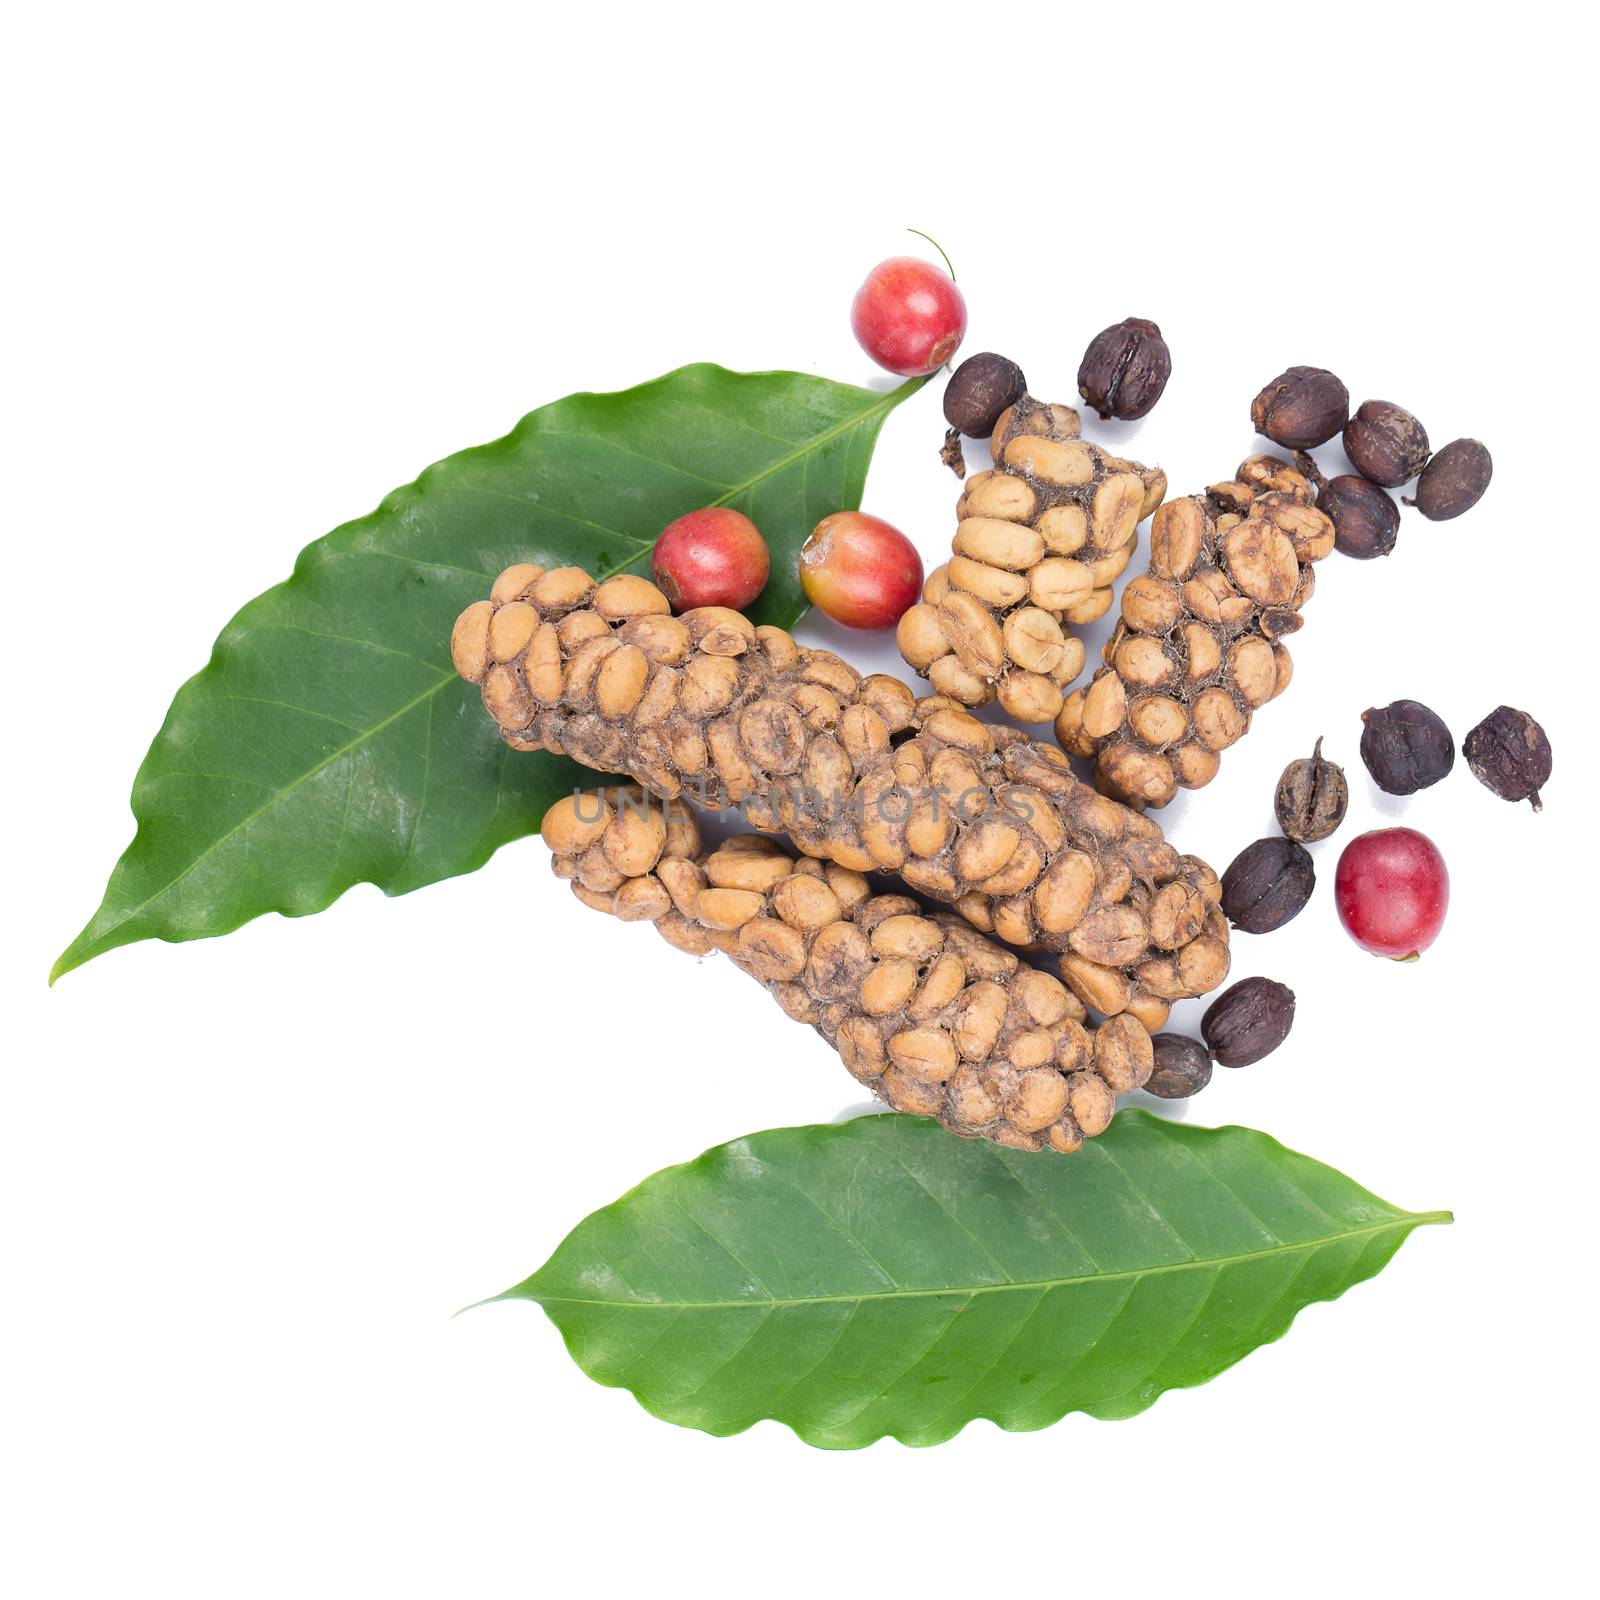 Kopi luwak or civet coffee, Coffee beans excreted by the civet isolated on white background.